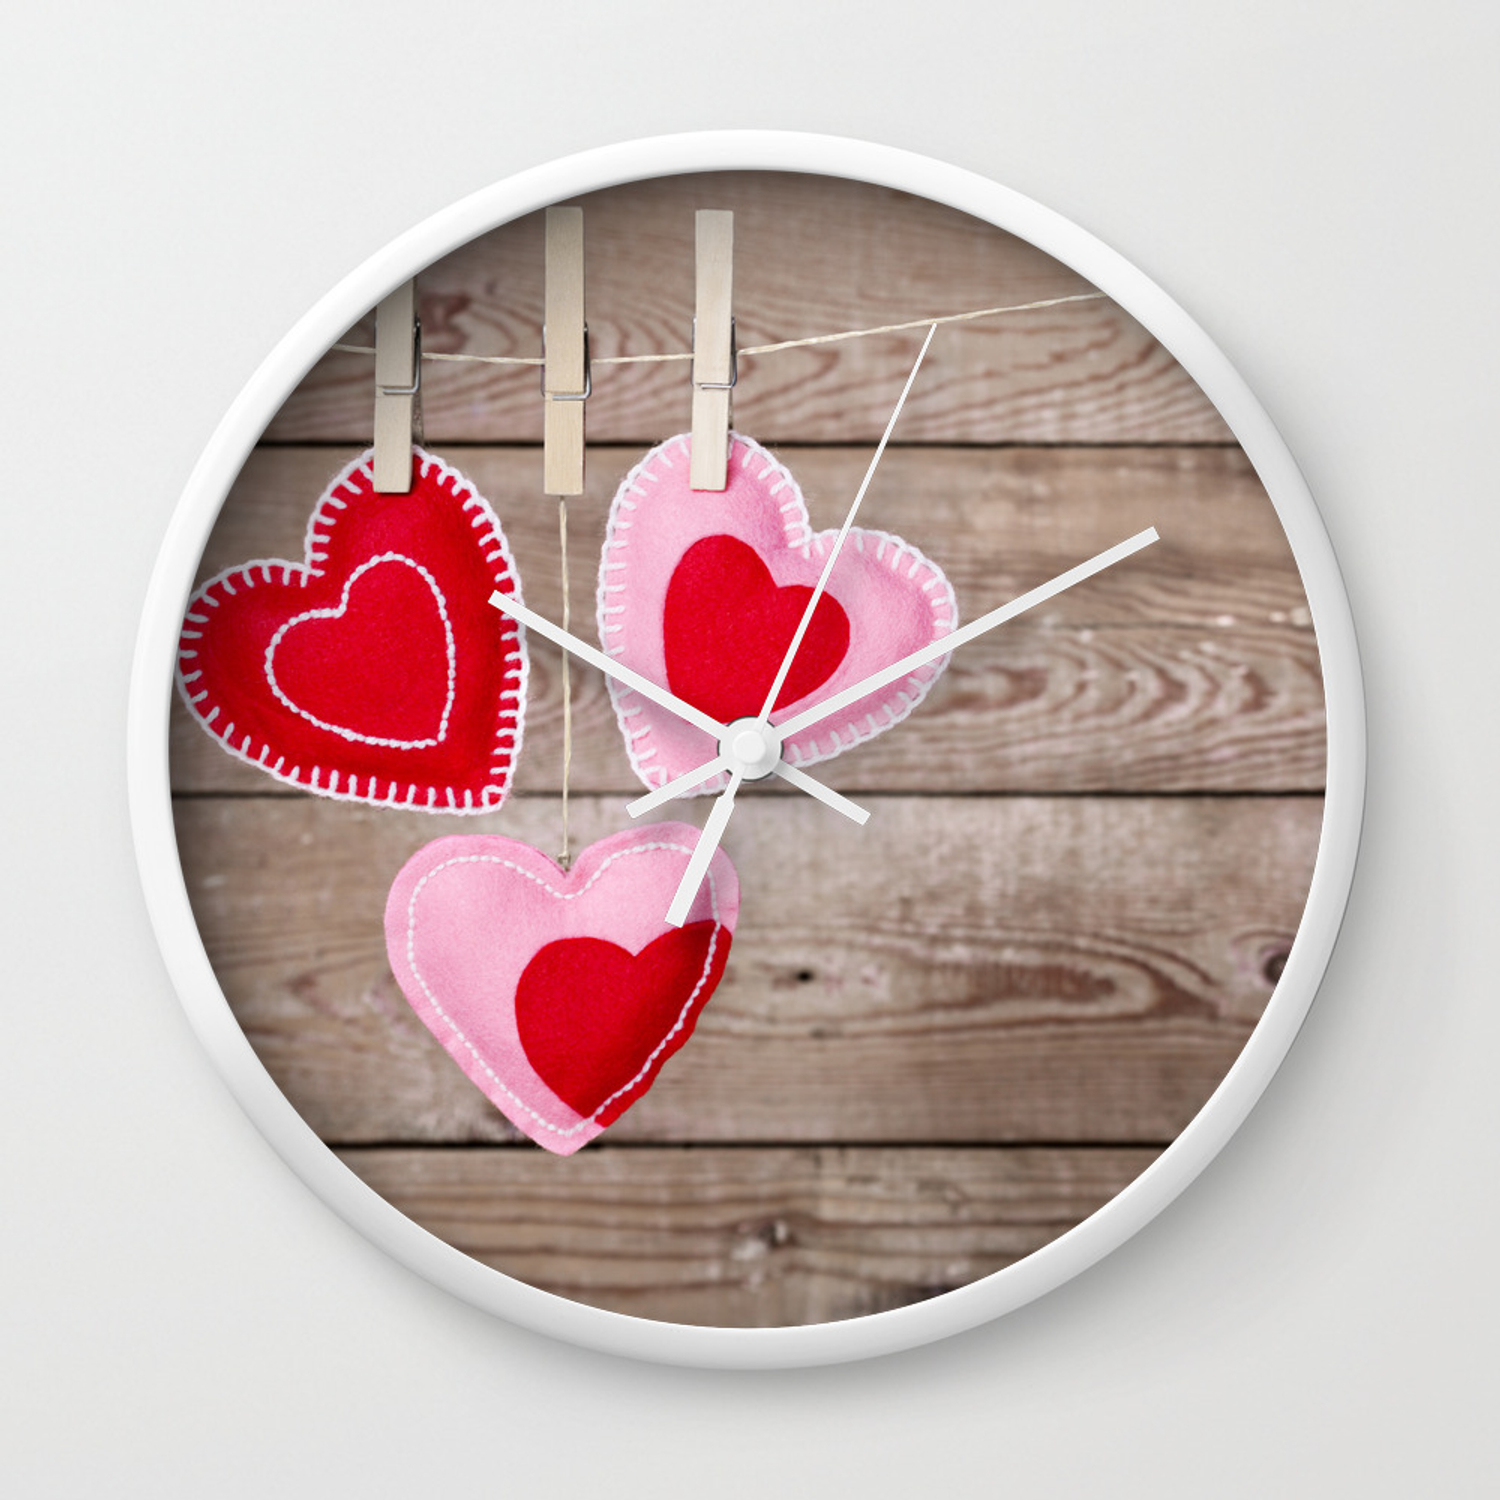 I with Valentine's Day hearts decorations on a